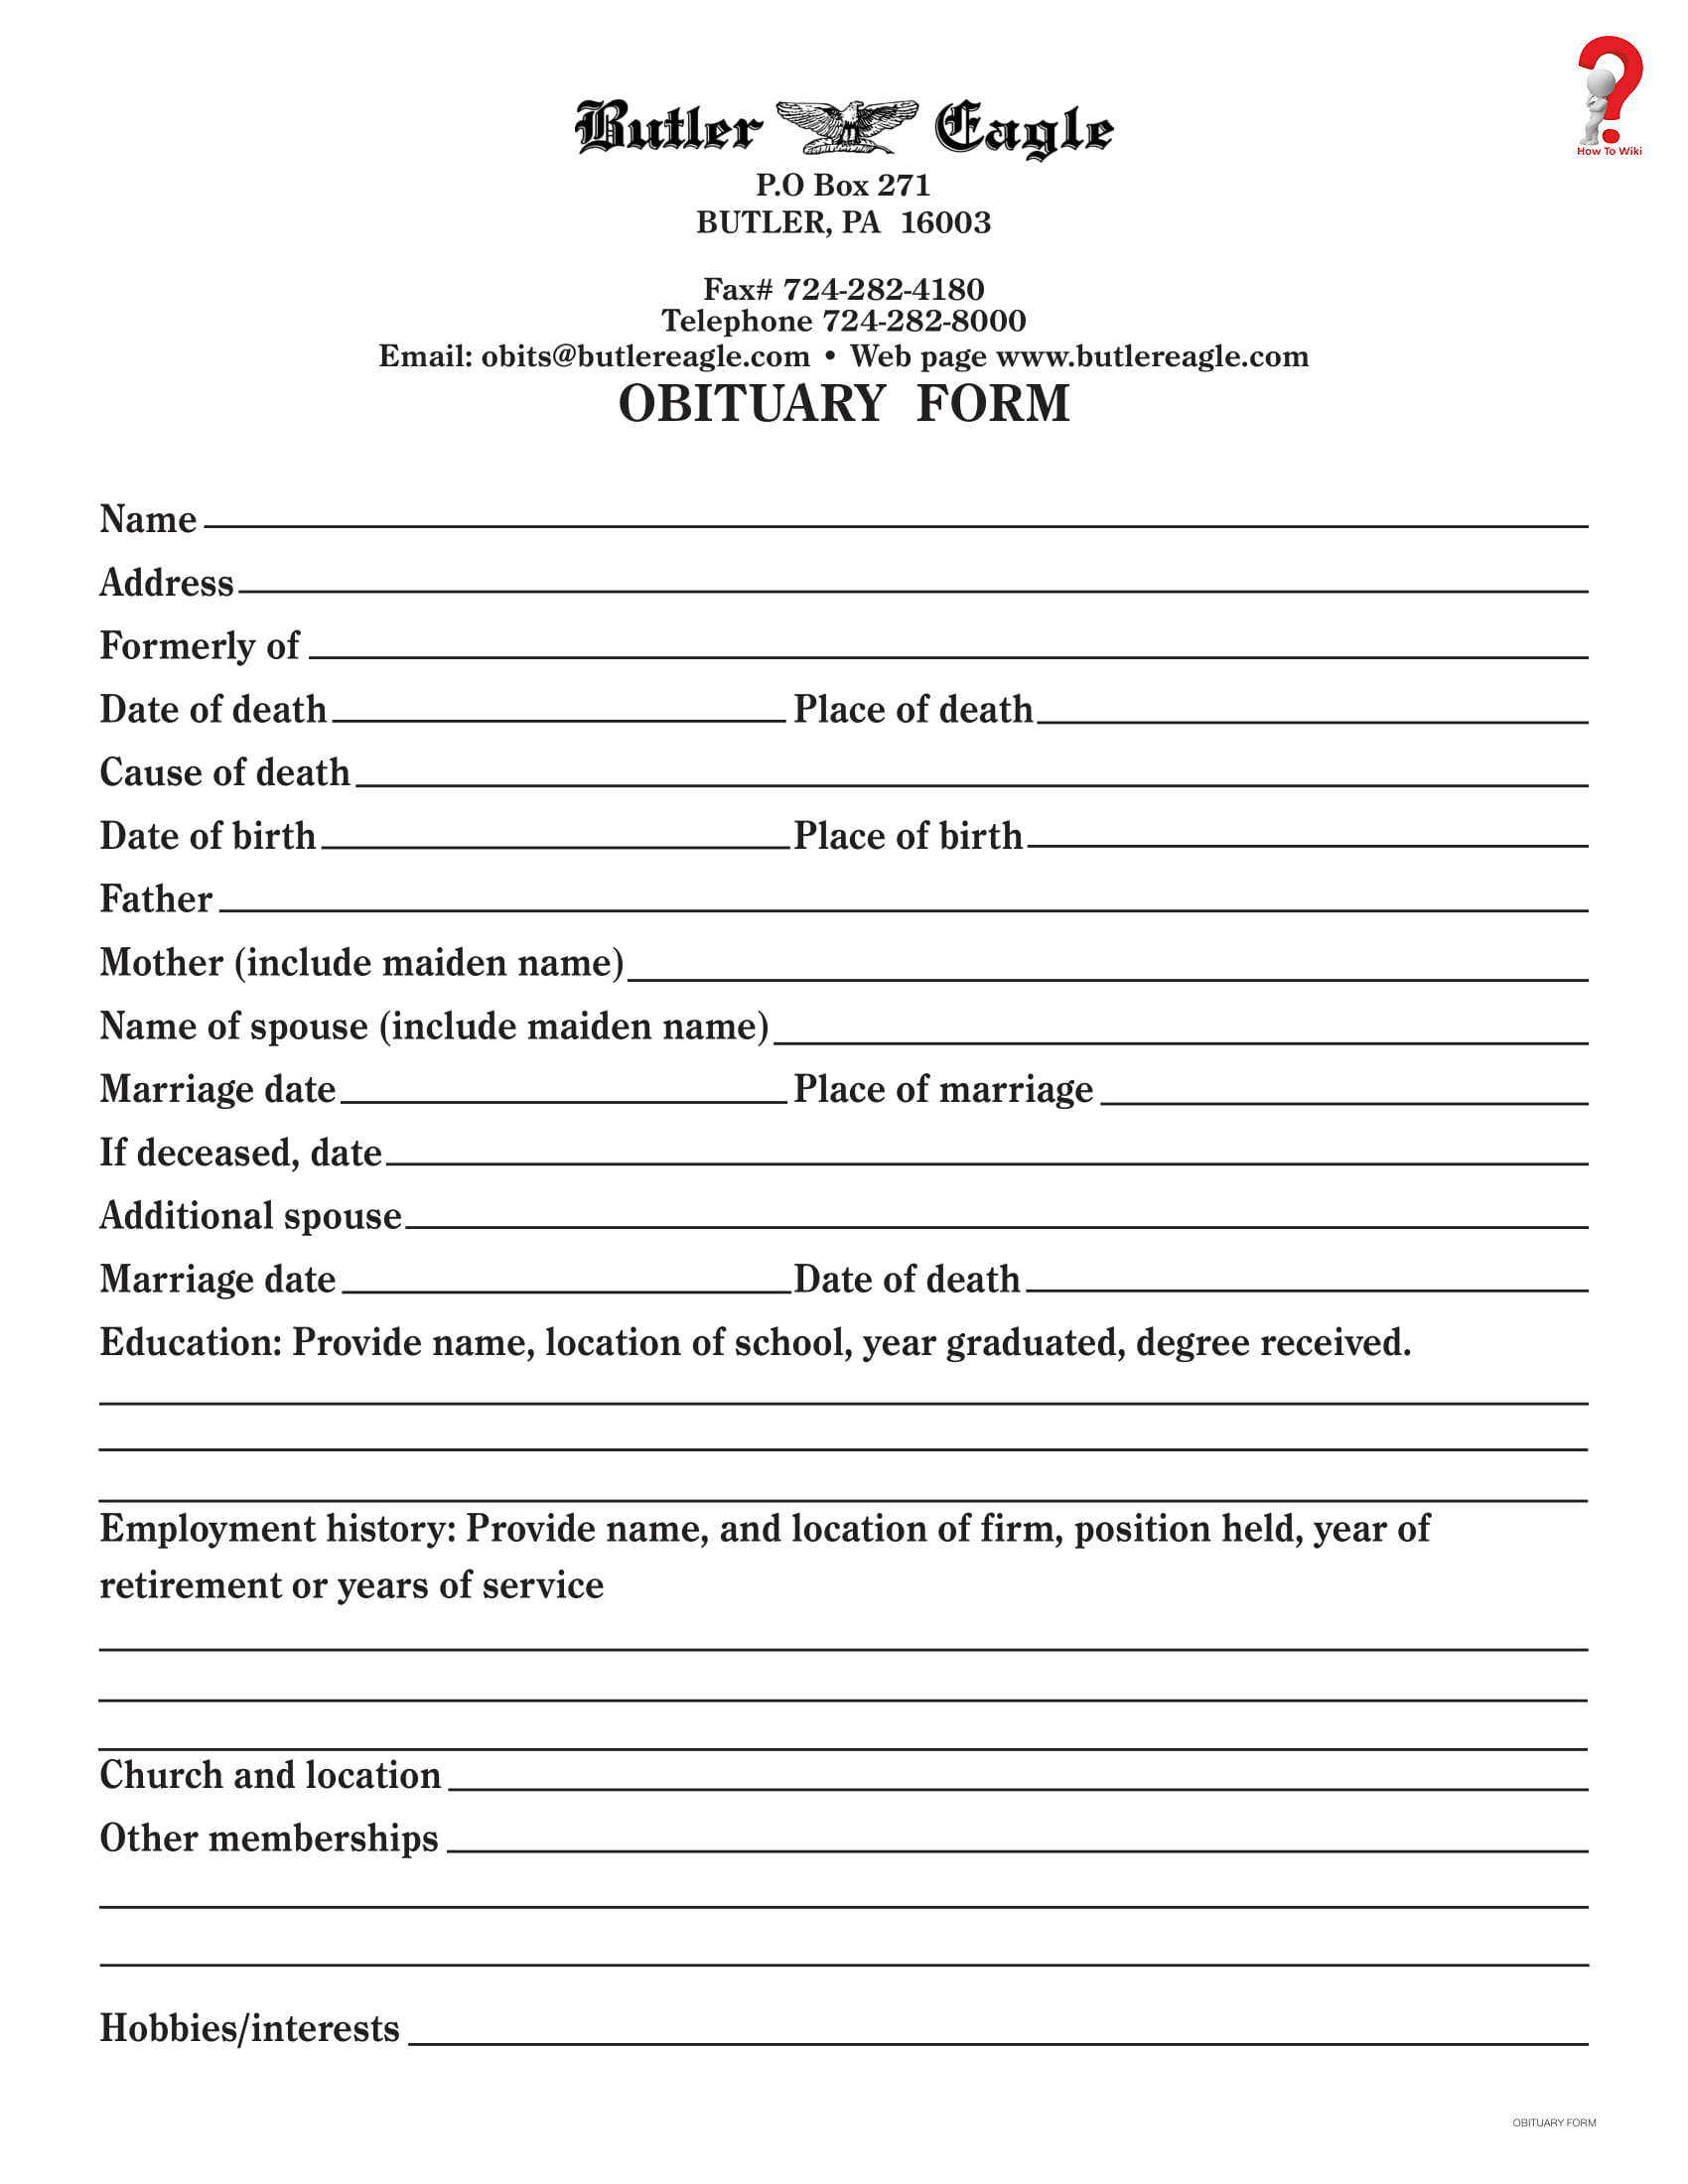 How To Write An Obituary Template In Simple Steps | How To Wiki Inside Fill In The Blank Obituary Template